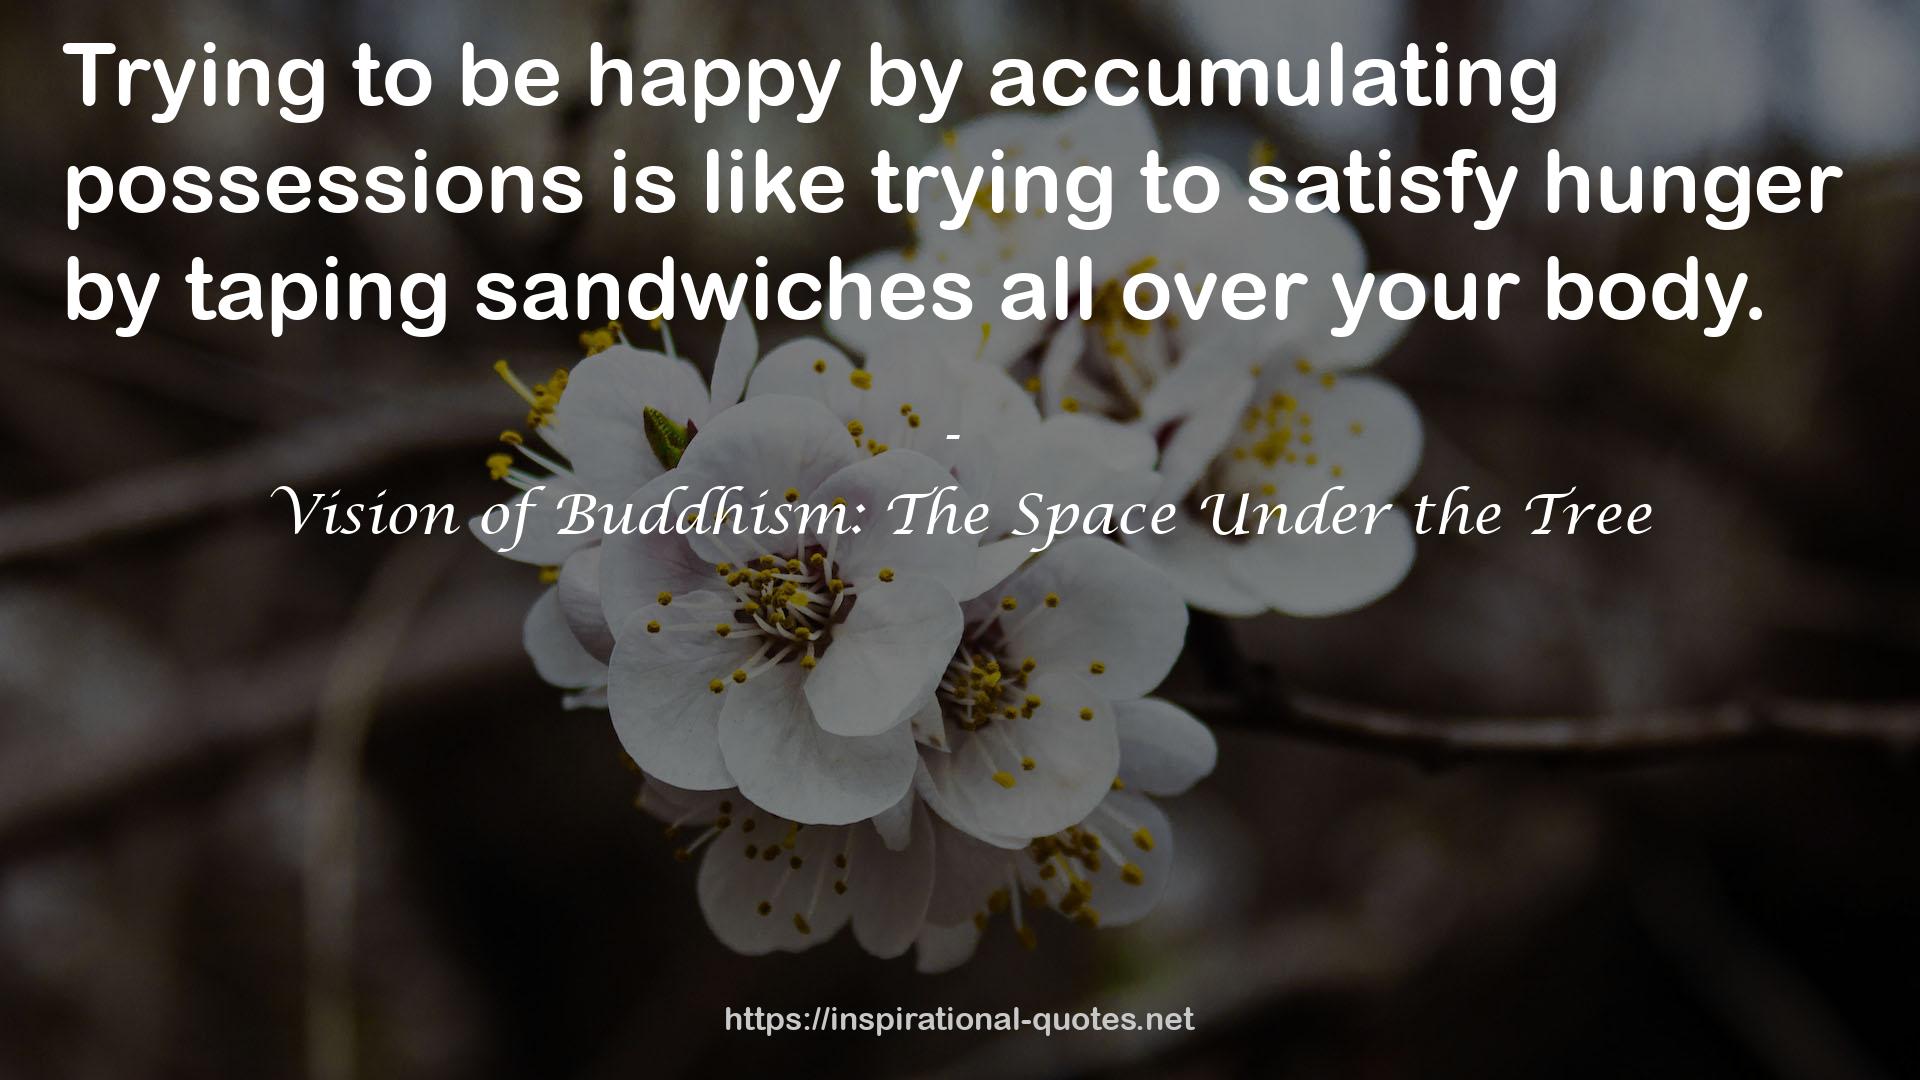 Vision of Buddhism: The Space Under the Tree QUOTES